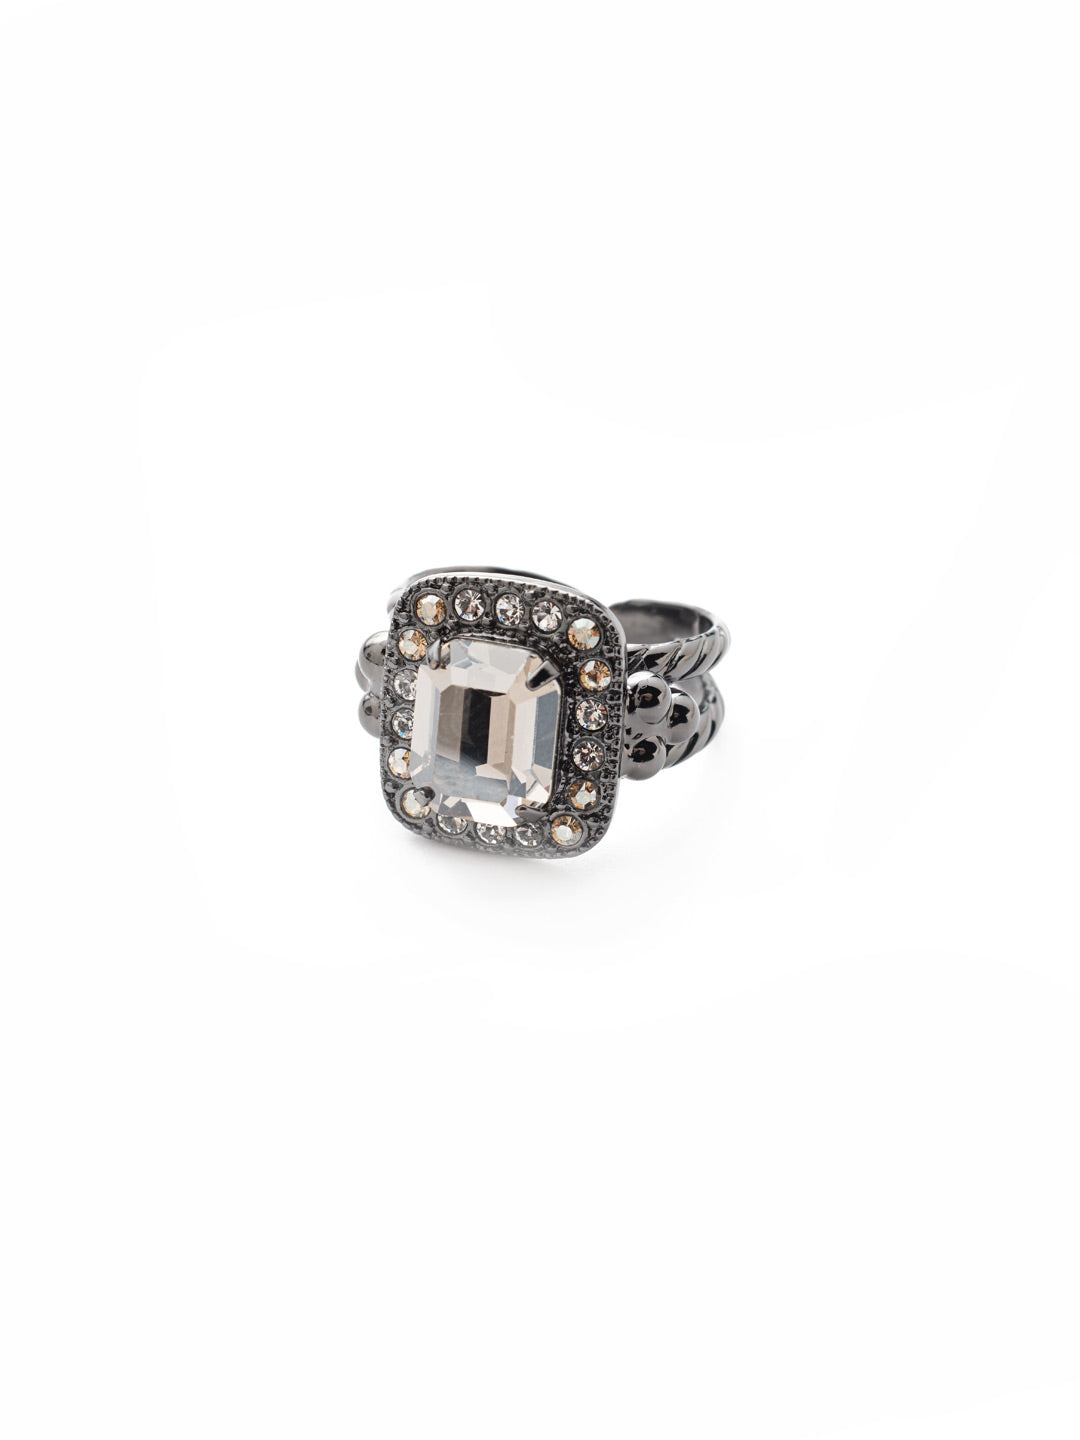 Opulent Octagon Cocktail Ring - RDQ41GMGNS - A central crystal surrounded by petite gems perches atop an adjustable double band. From Sorrelli's Golden Shadow collection in our Gun Metal finish.